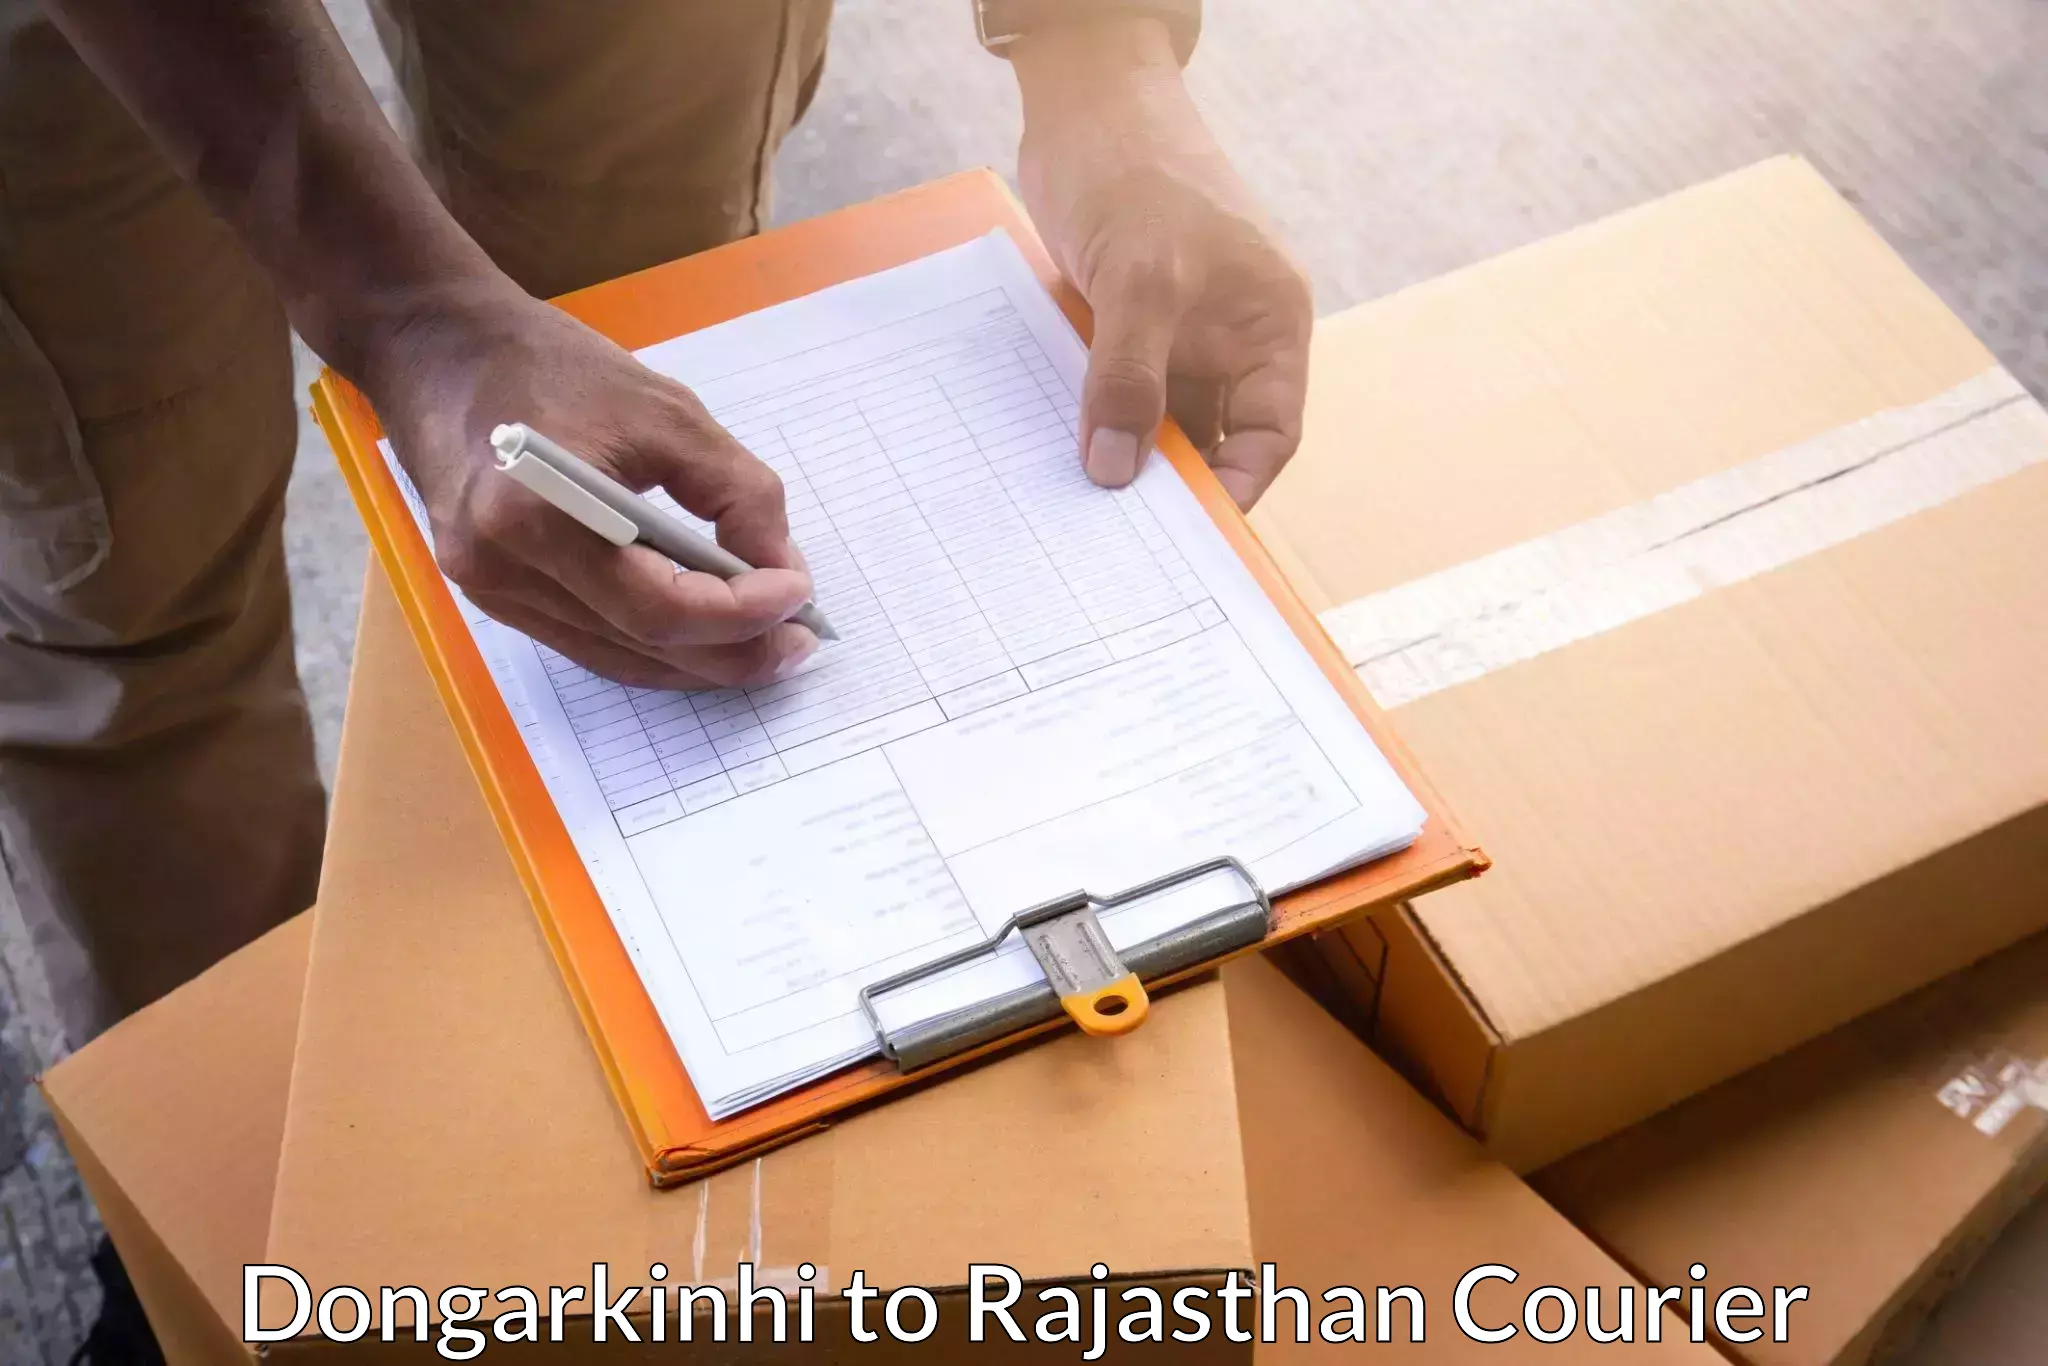 Next-day delivery options Dongarkinhi to Rajasthan